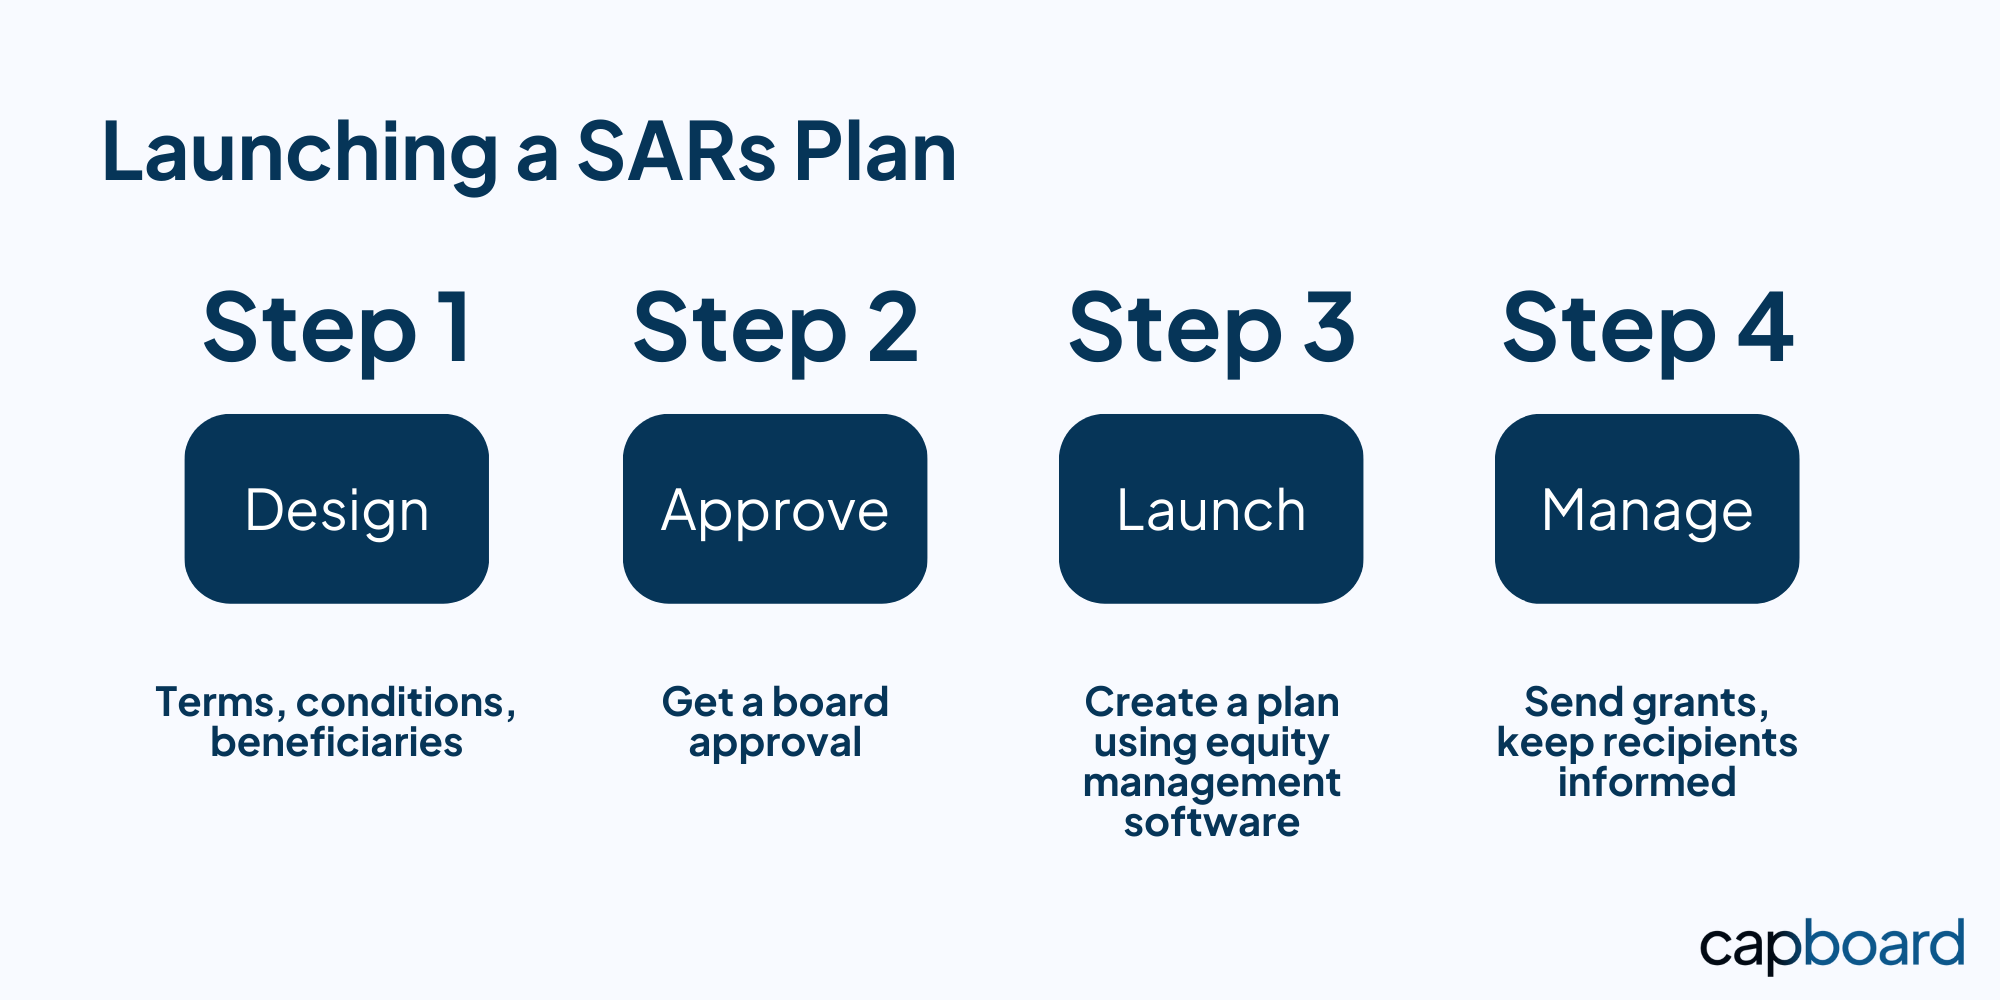 A 4-step process how to launch a SARs plan in a private company.